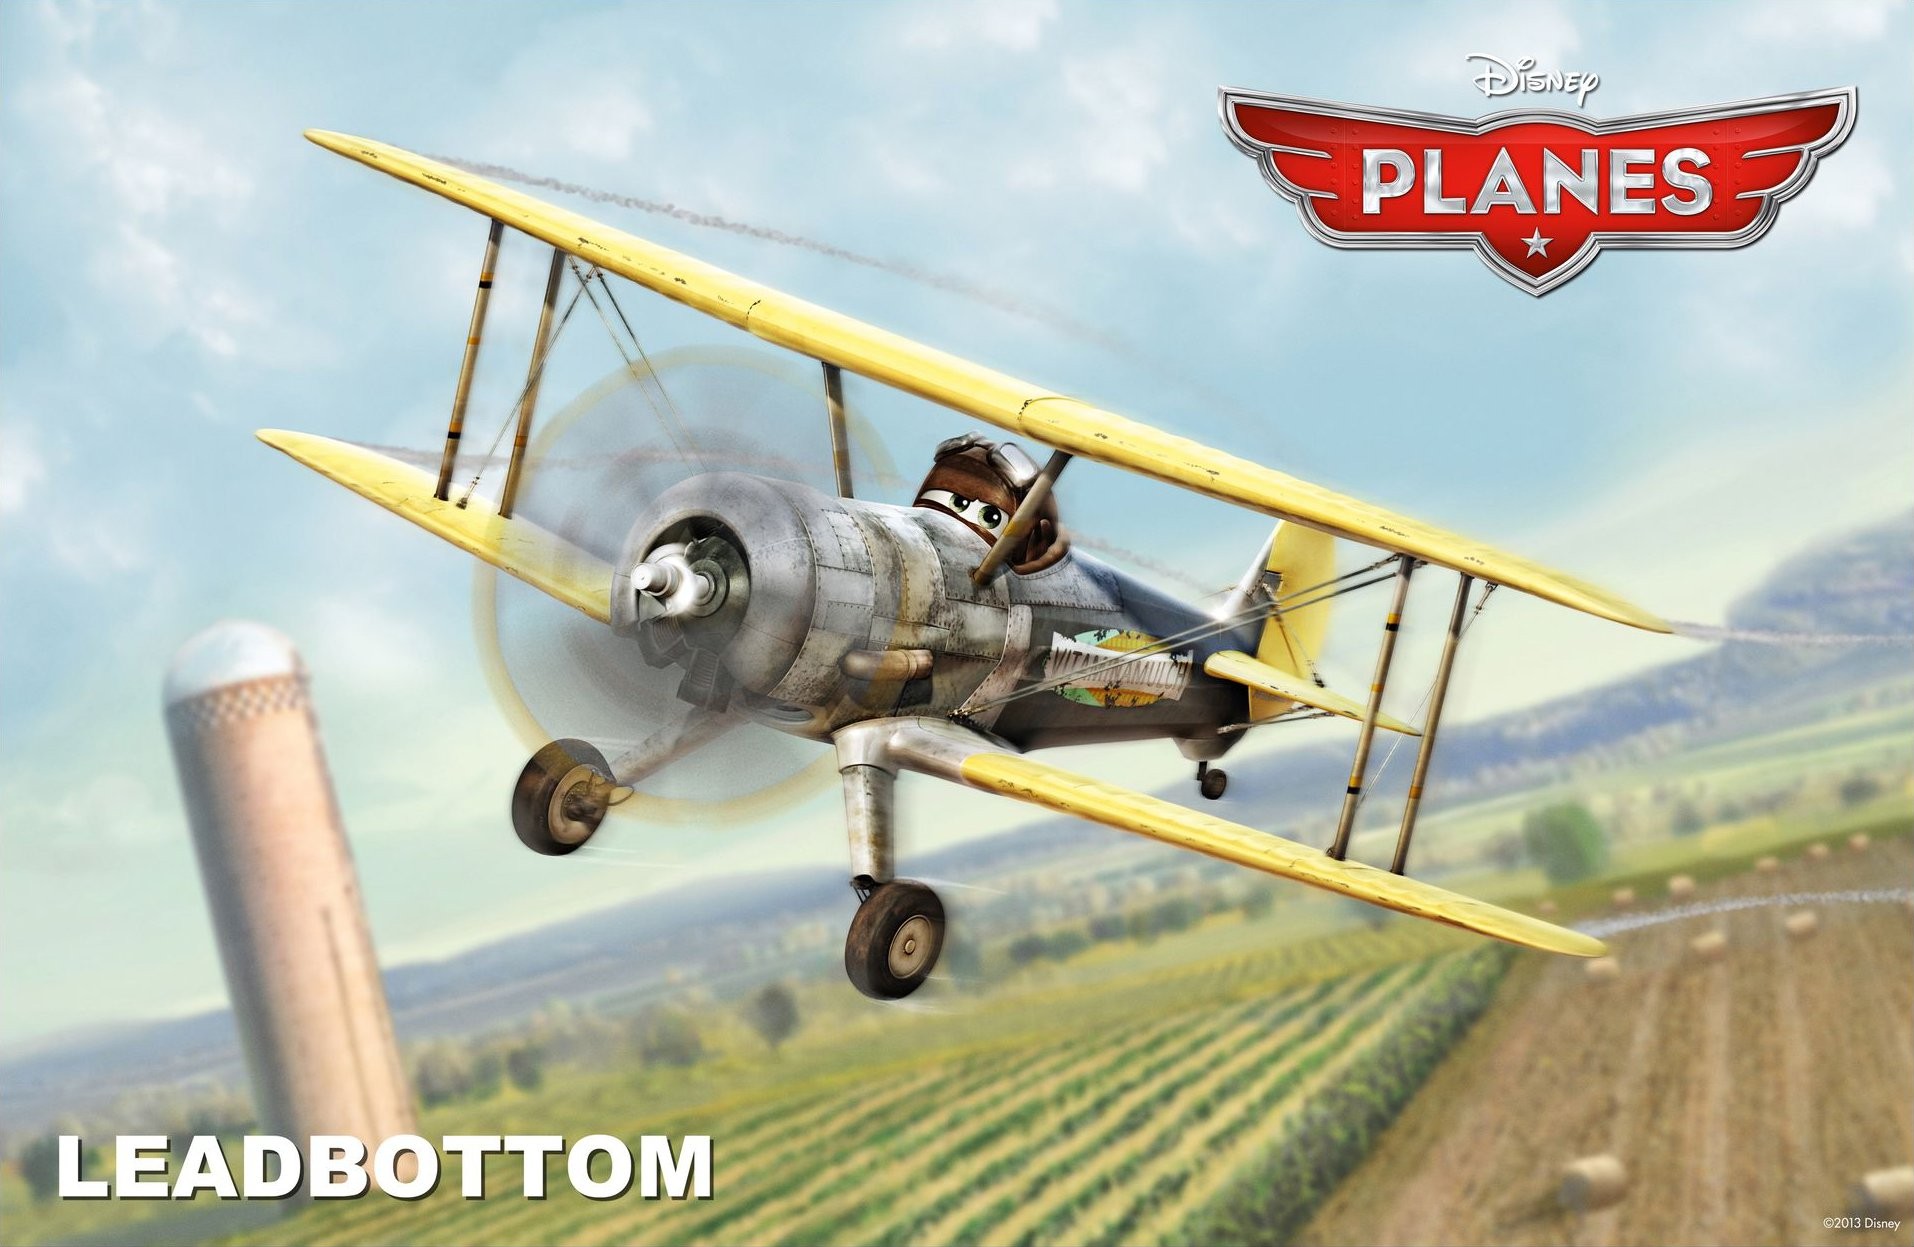 Leadbottom from Walt Disney Pictures' Planes (2013)